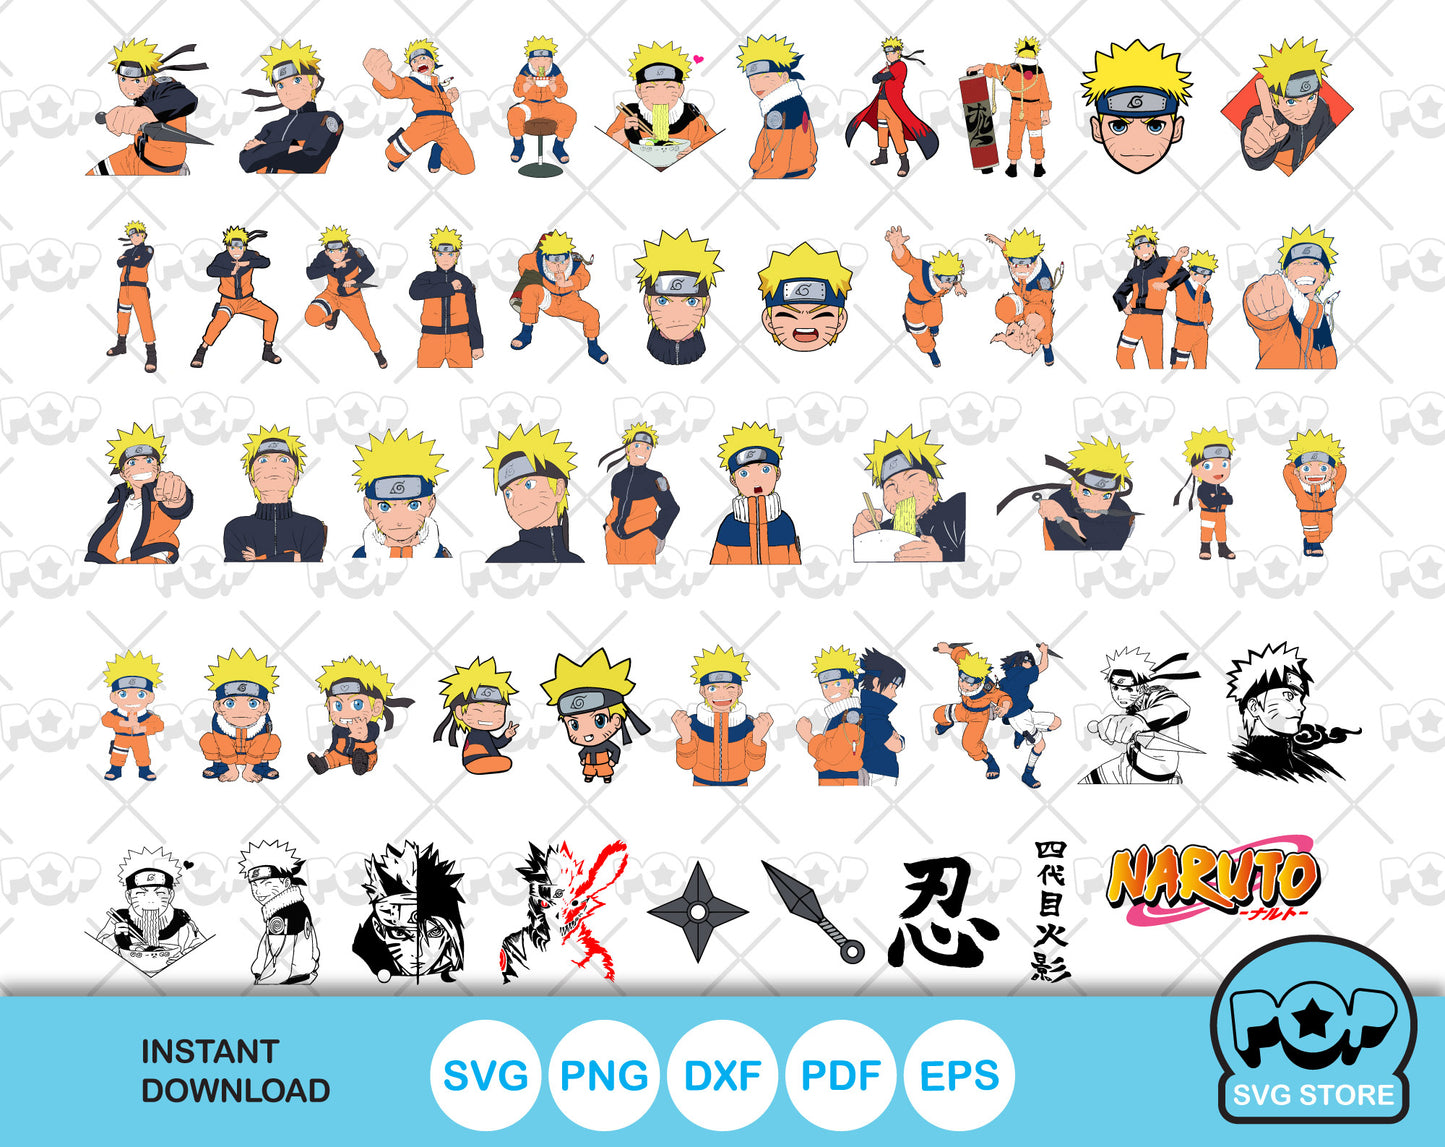 Naruto clipart set, Naruto SVG cut files for Cricut / Silhouette, SVG, PNG, DXF, instant download